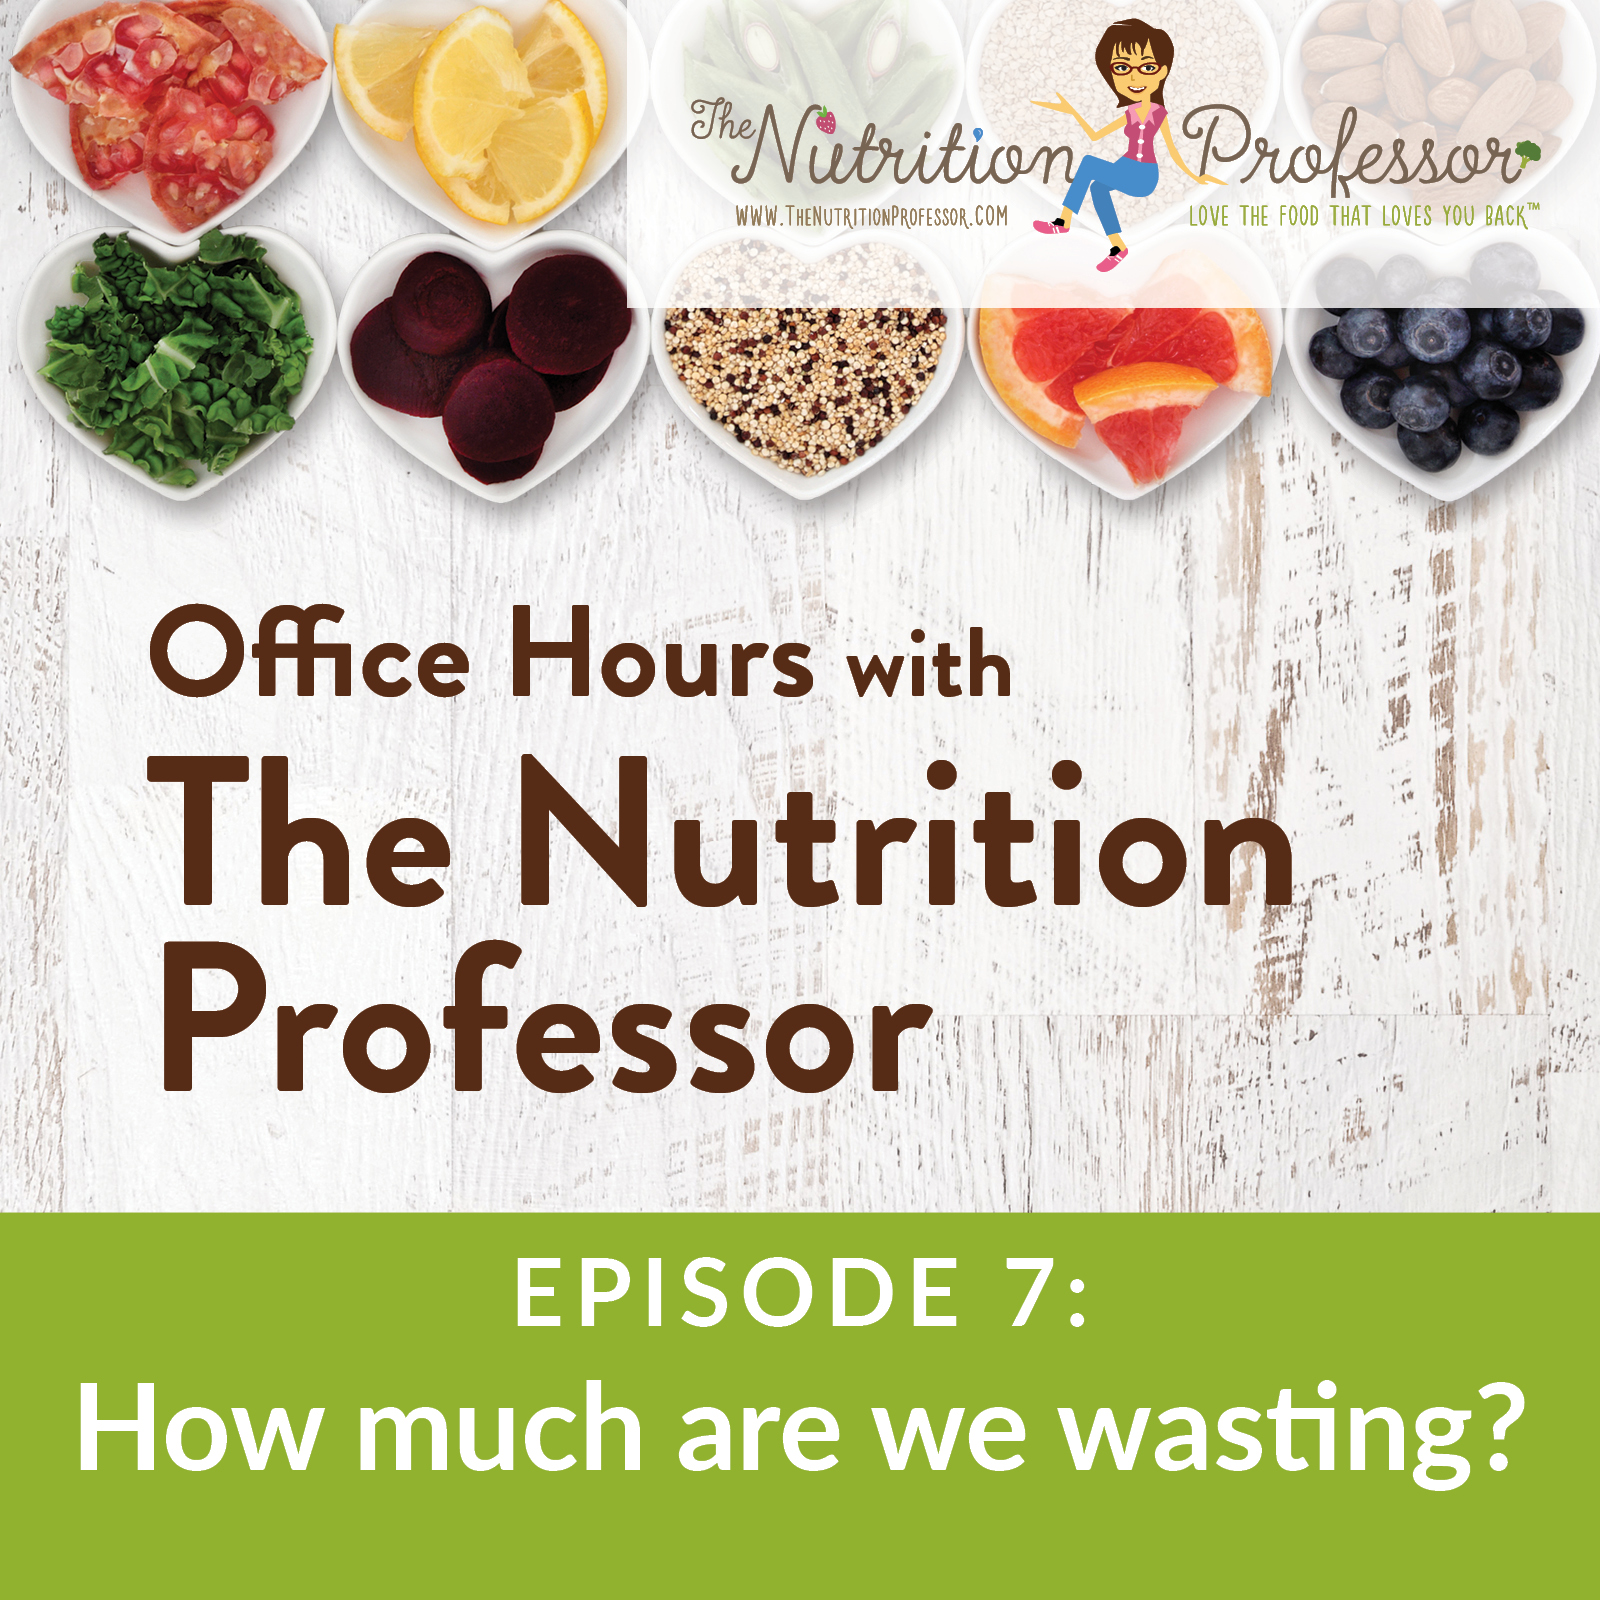 Podcast Episode 7: How much are we wasting?